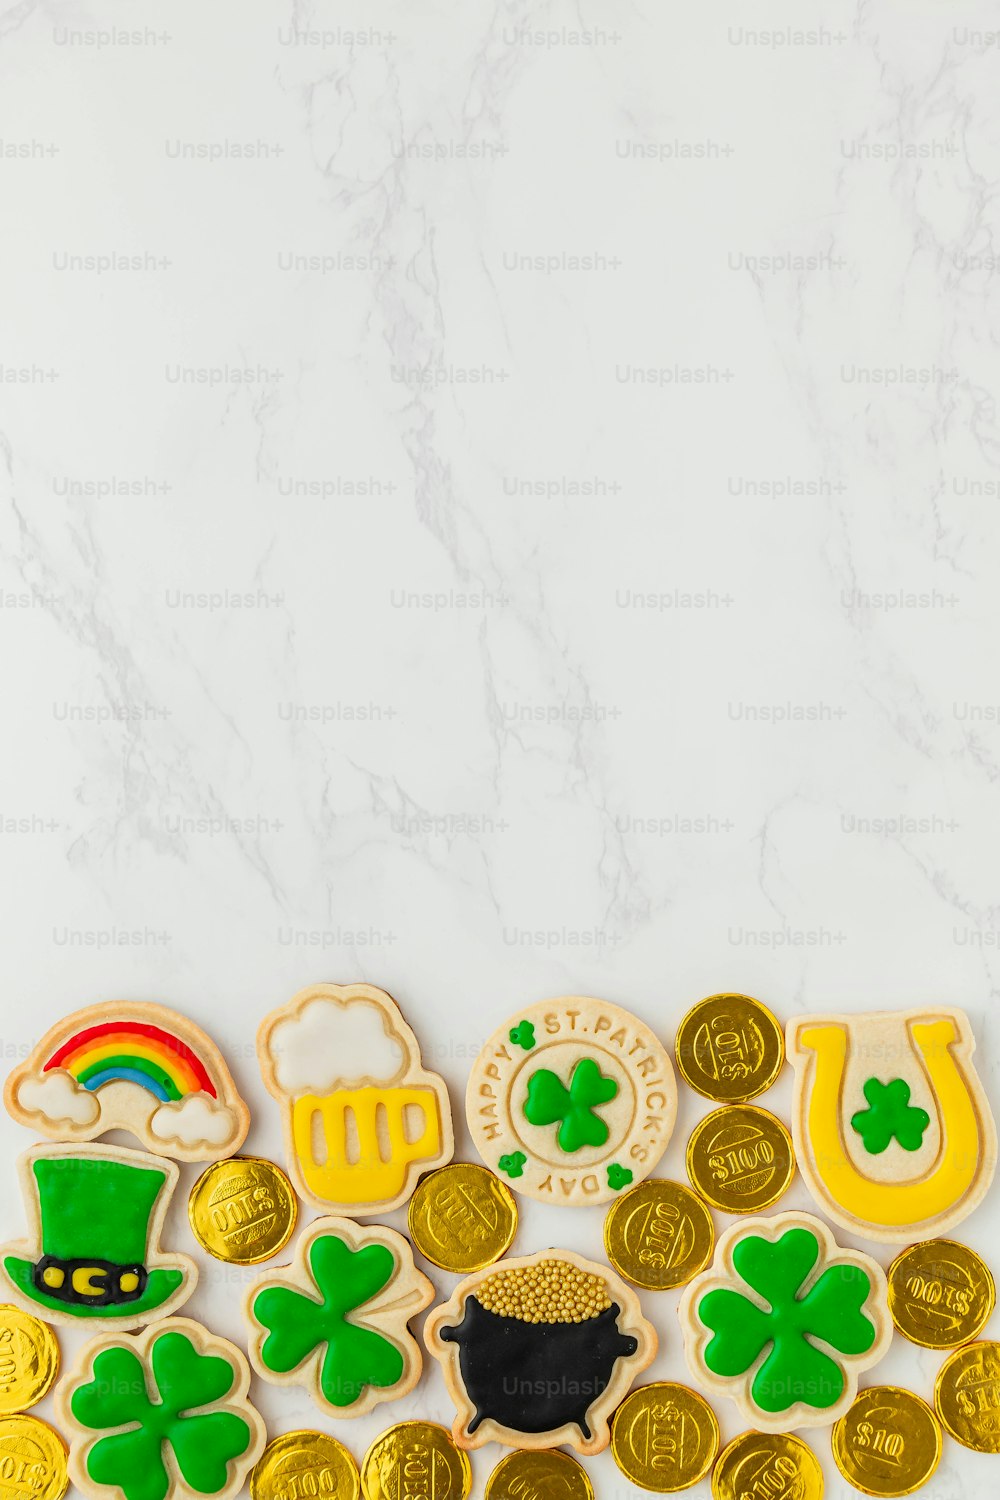 st patrick's day cookies with shamrocks and gold coins